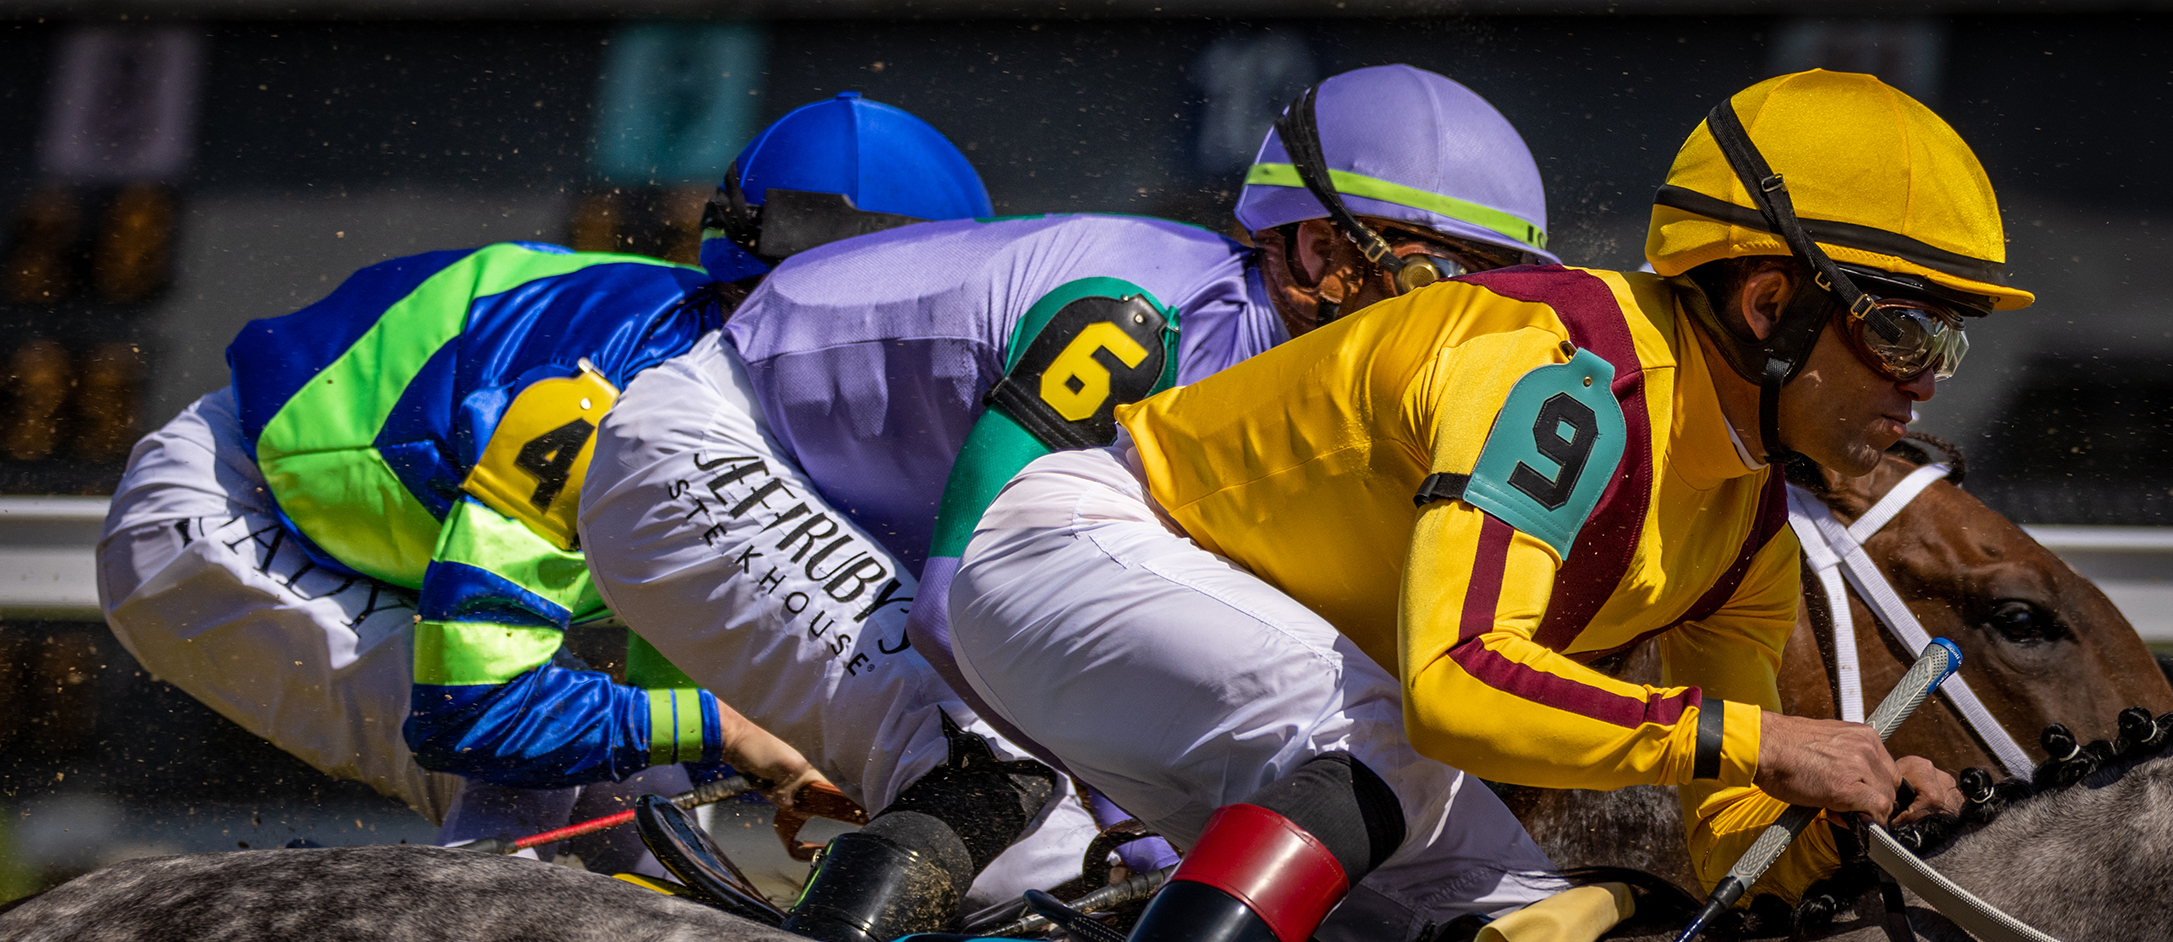 "Jockey for Position' (Churchill Downs, Louisville, KY - May 5, 2023), photograph by Heather C. Jackson